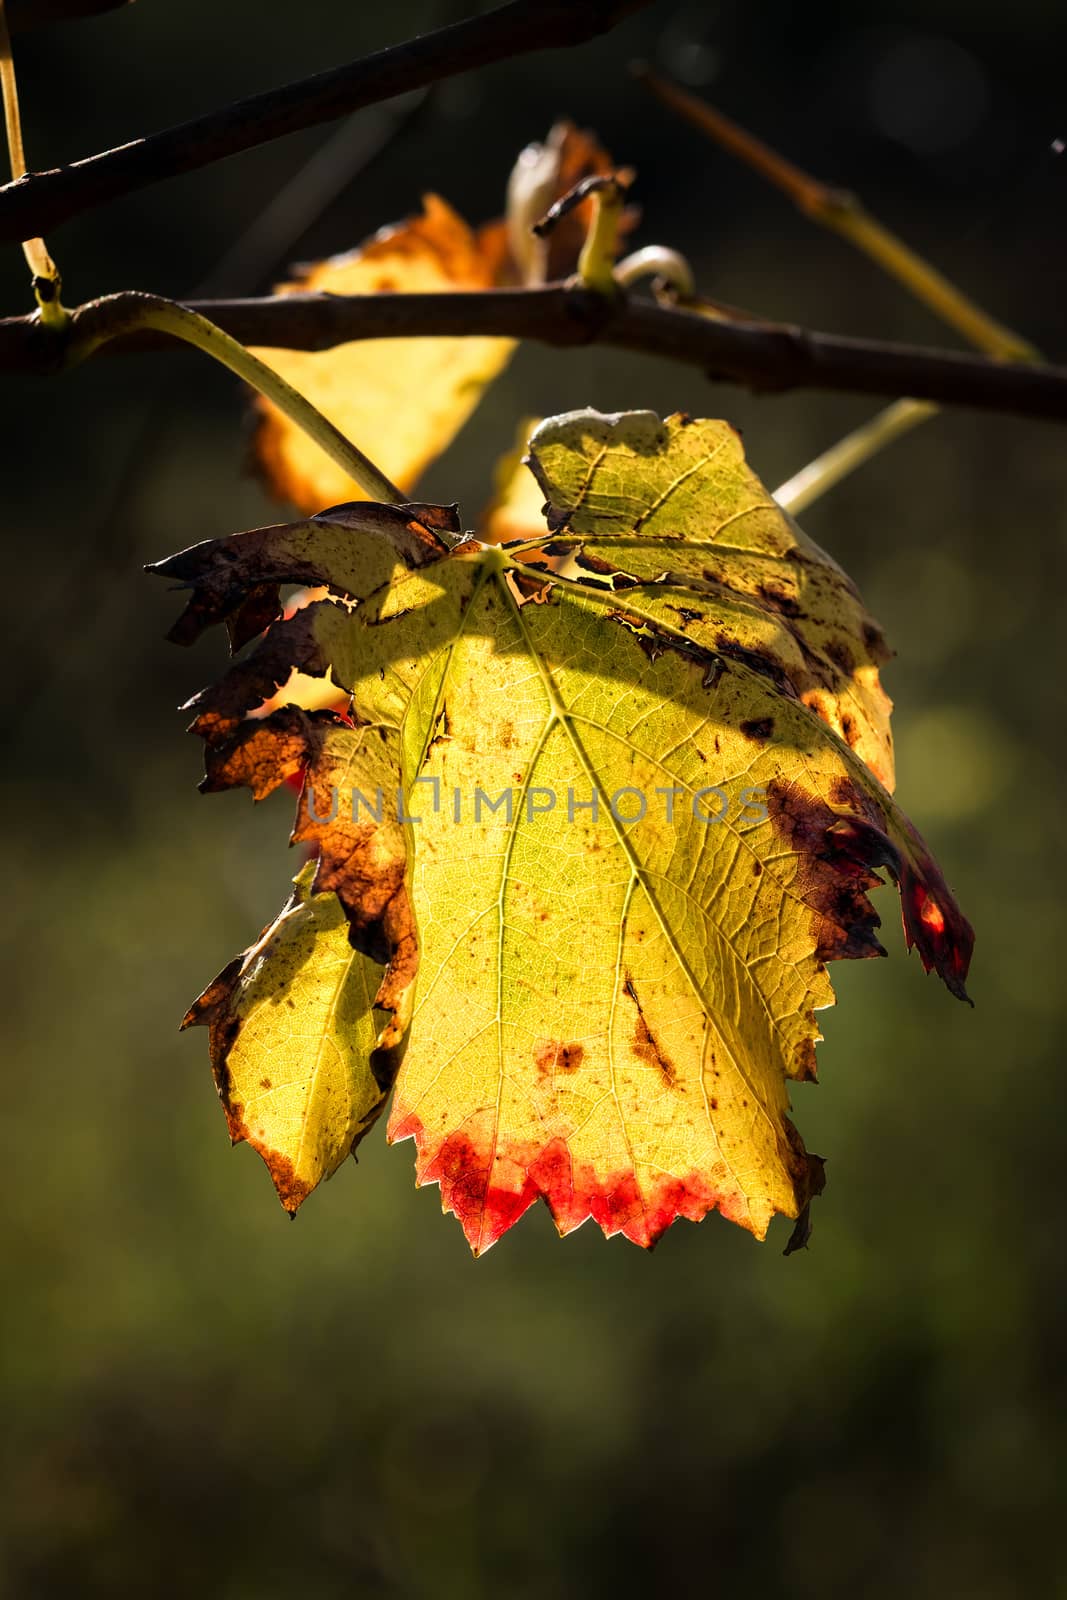 Leaf in the autumn time